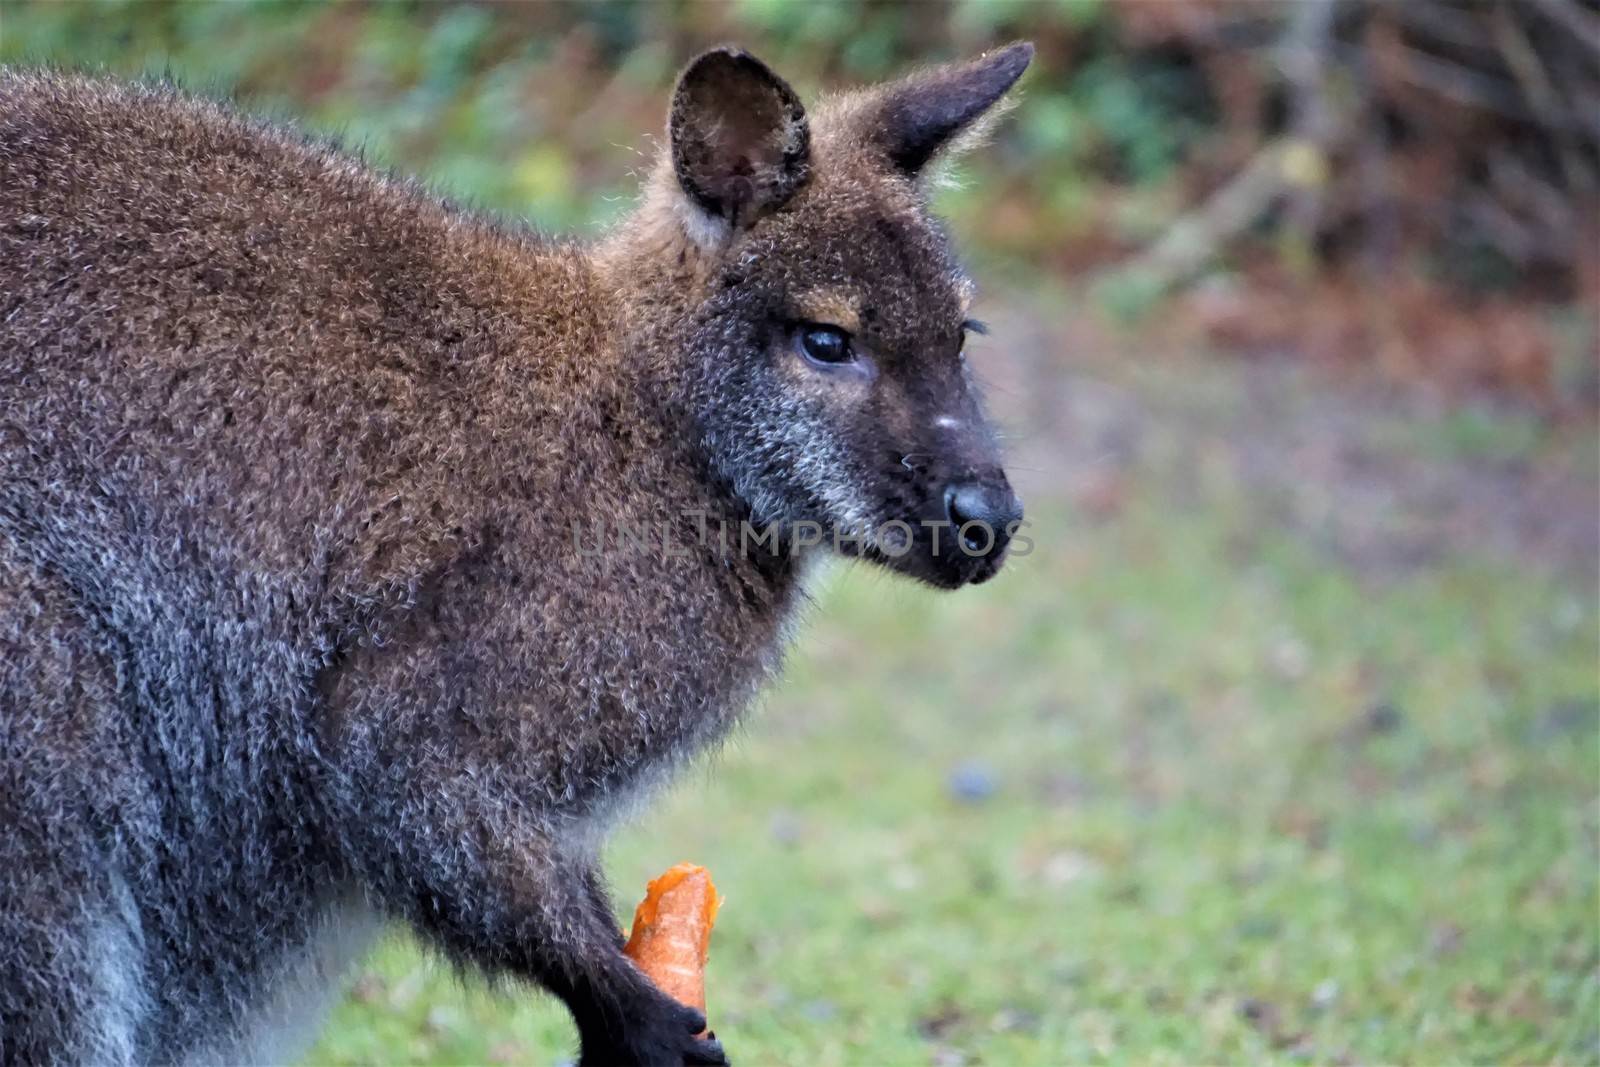 Red-necked wallaby eating a carrot by pisces2386